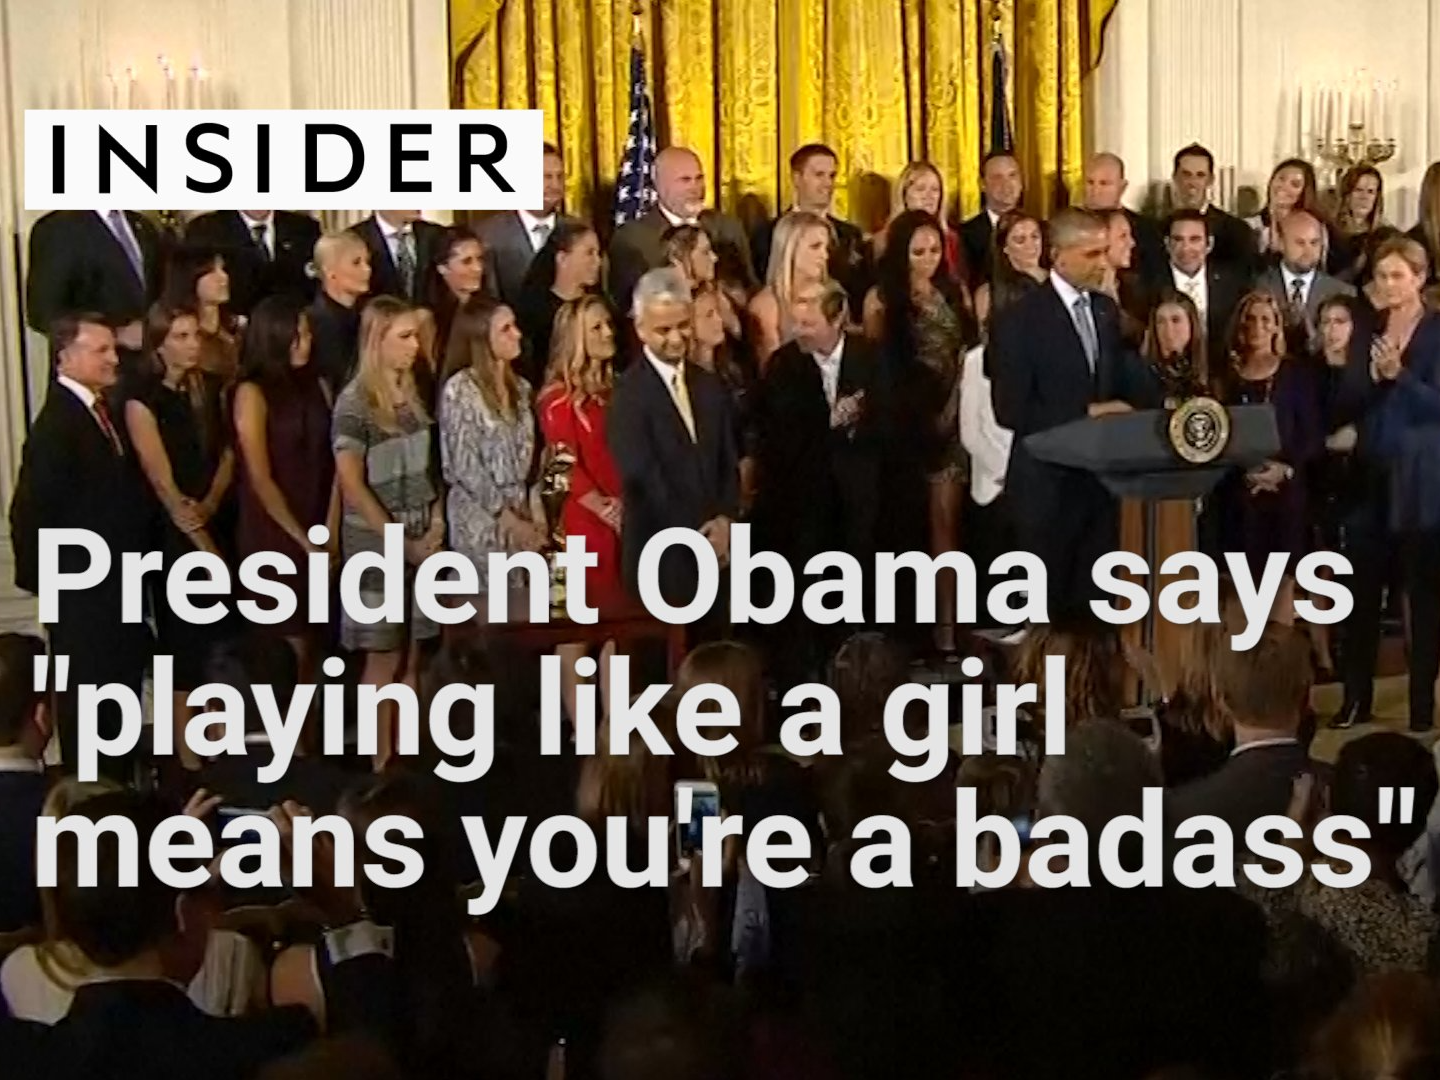 president-obama-to-us-womens-soccer-team-playing-like-a-girl-means-youre-a-badass.jpg